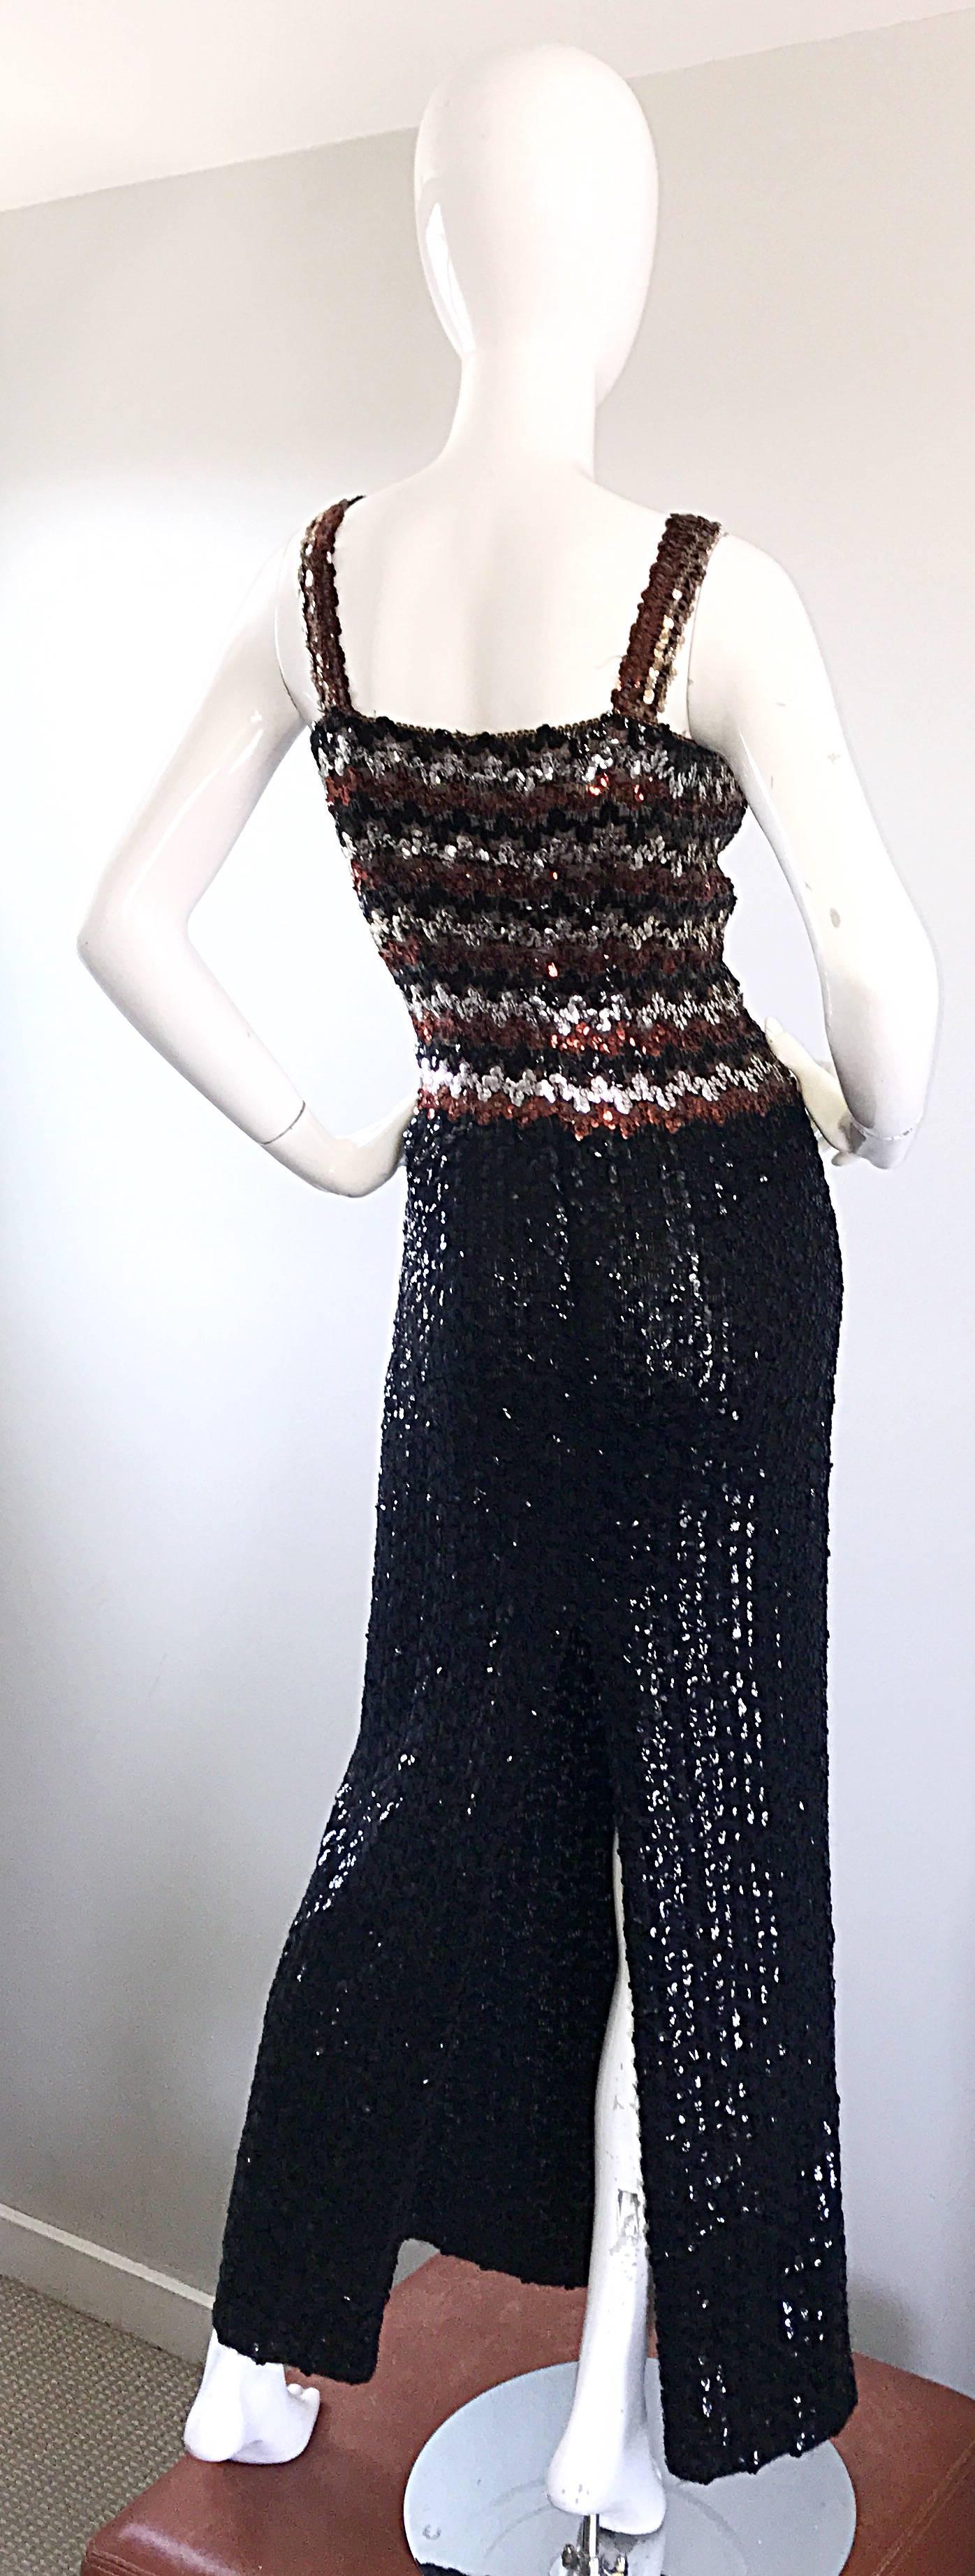 1970s Sequined Black + Brown + Silver Vintage 70s Knit Sexy Evening Gown Dress For Sale 4